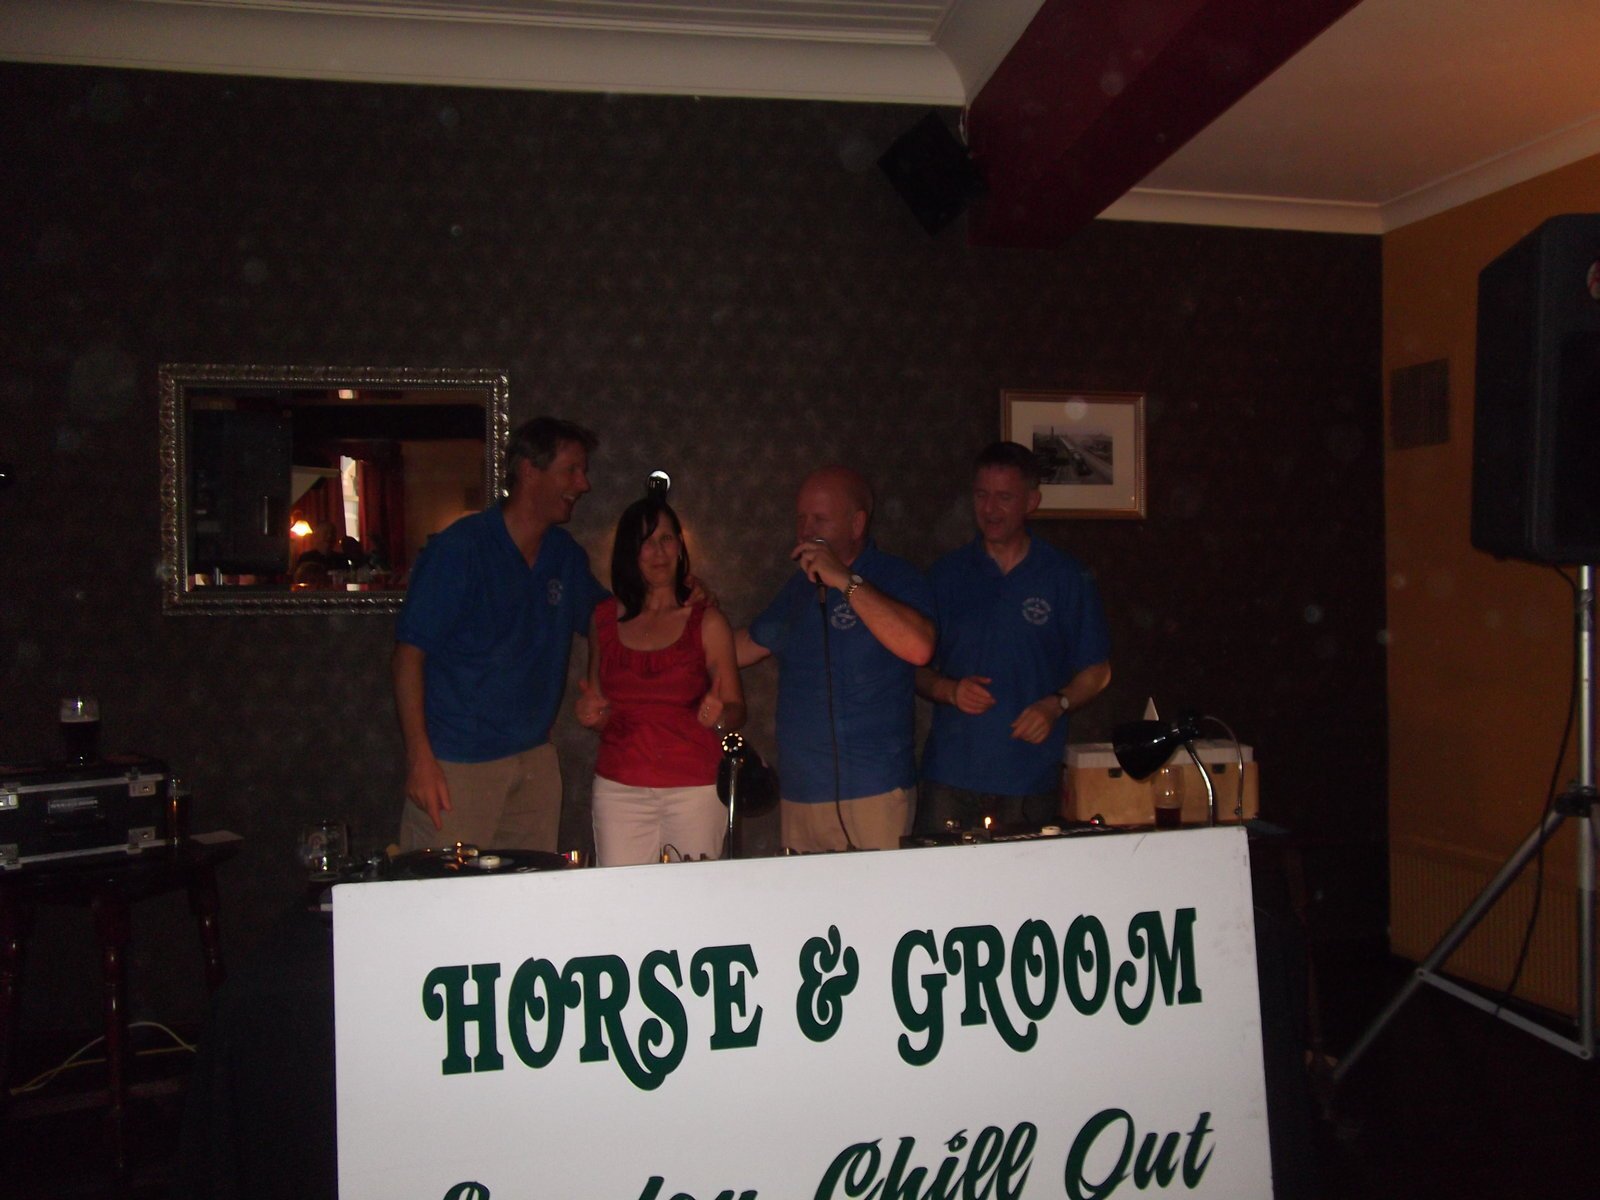 Sunday Chillout 4th Anniversary - Horse & Groom, Doncaster